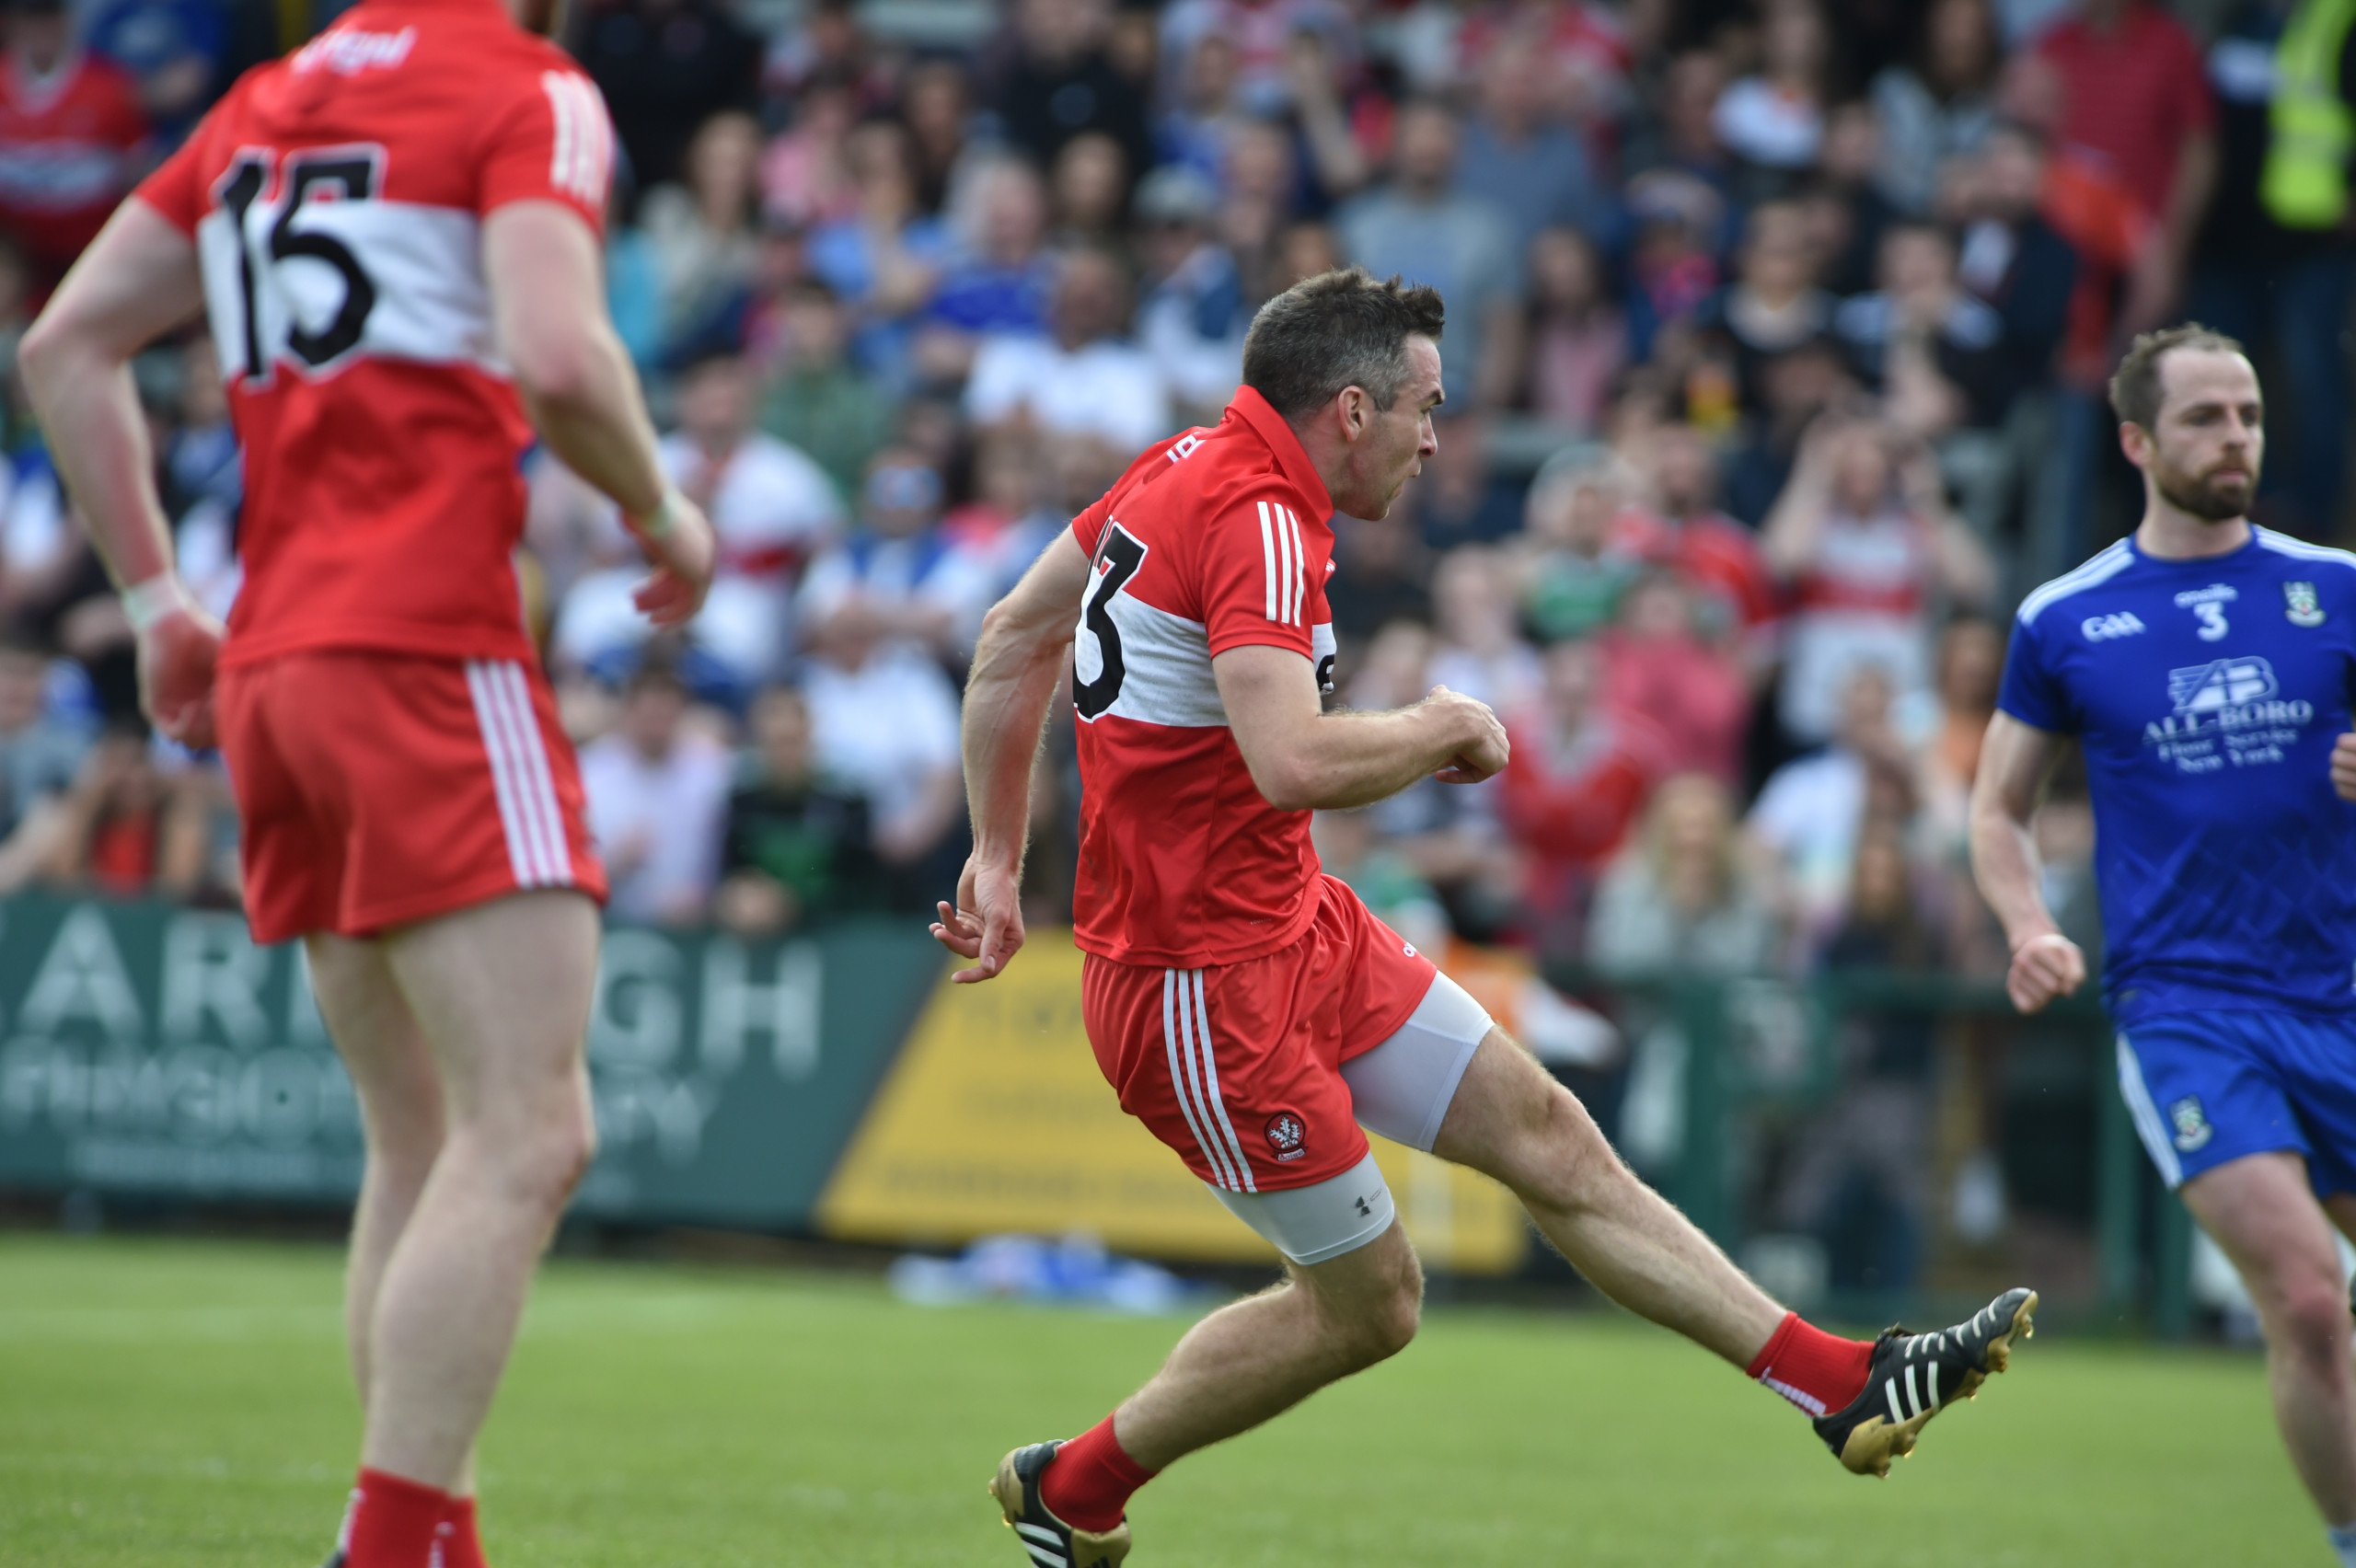 Ulster Final awaits for Derry after impressive win over Monaghan